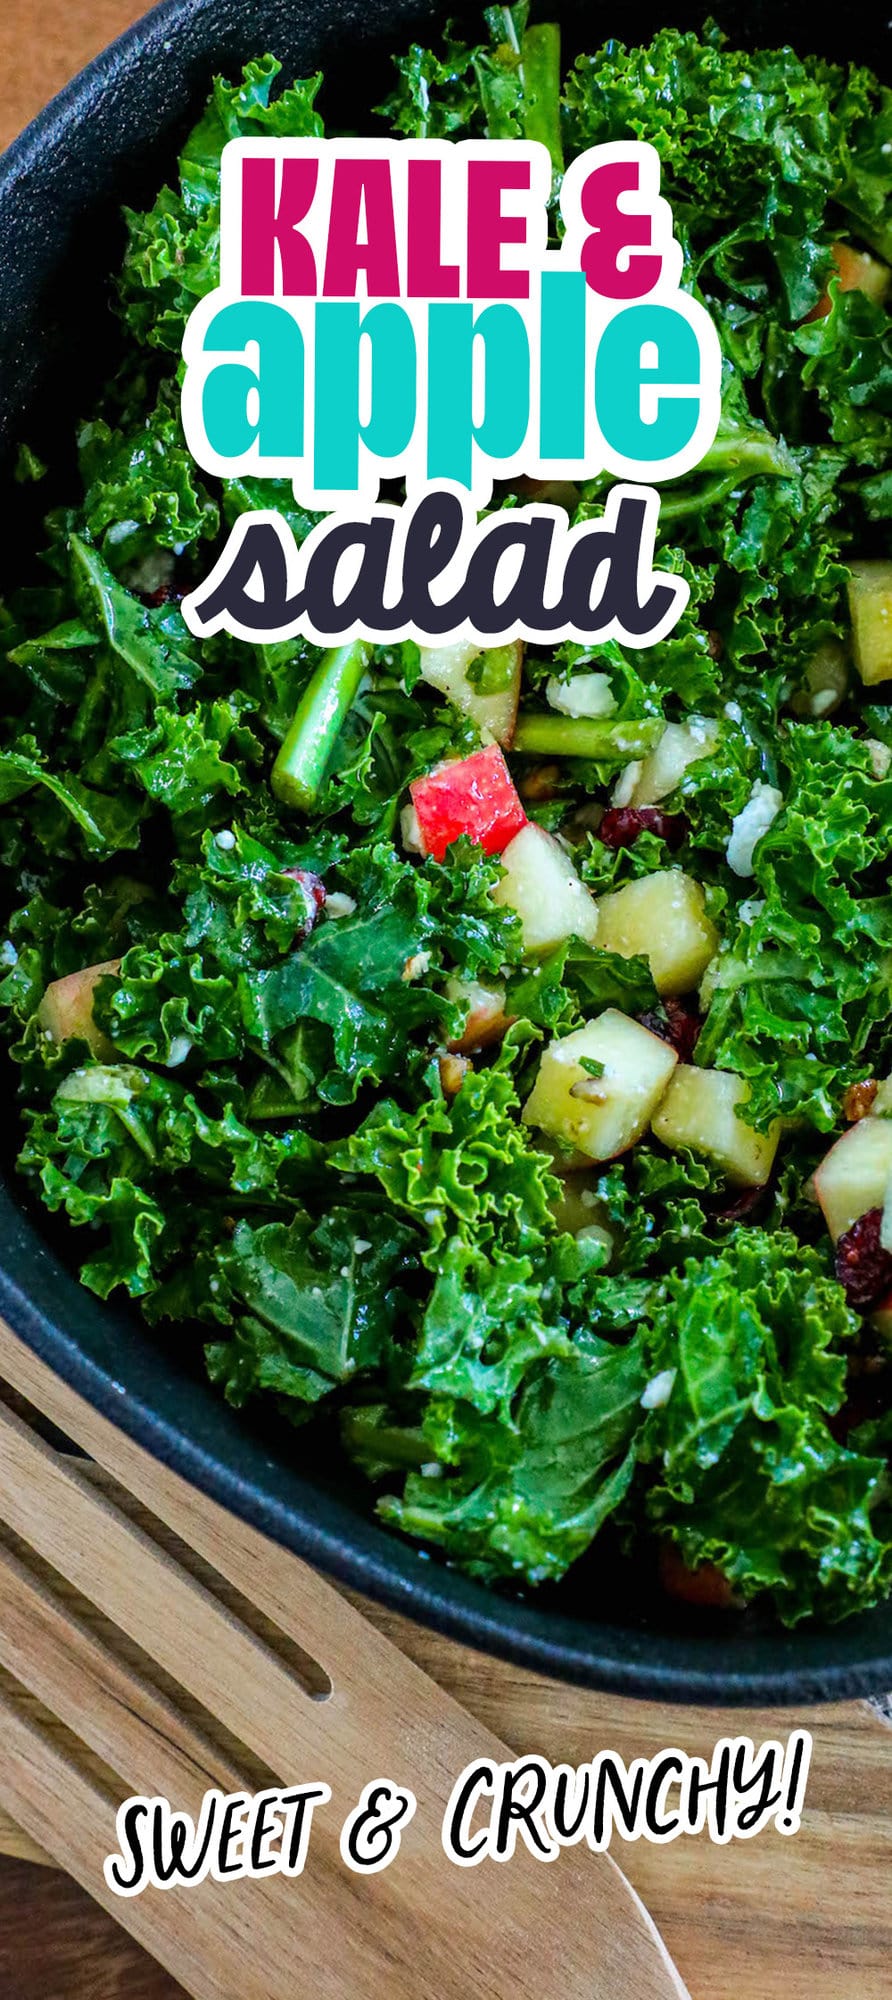 chopped green kale, craisins, chopped apples, walnuts, and feta cheese crumbles tossed in dressing in a black bowl on a table next to wooden spoons